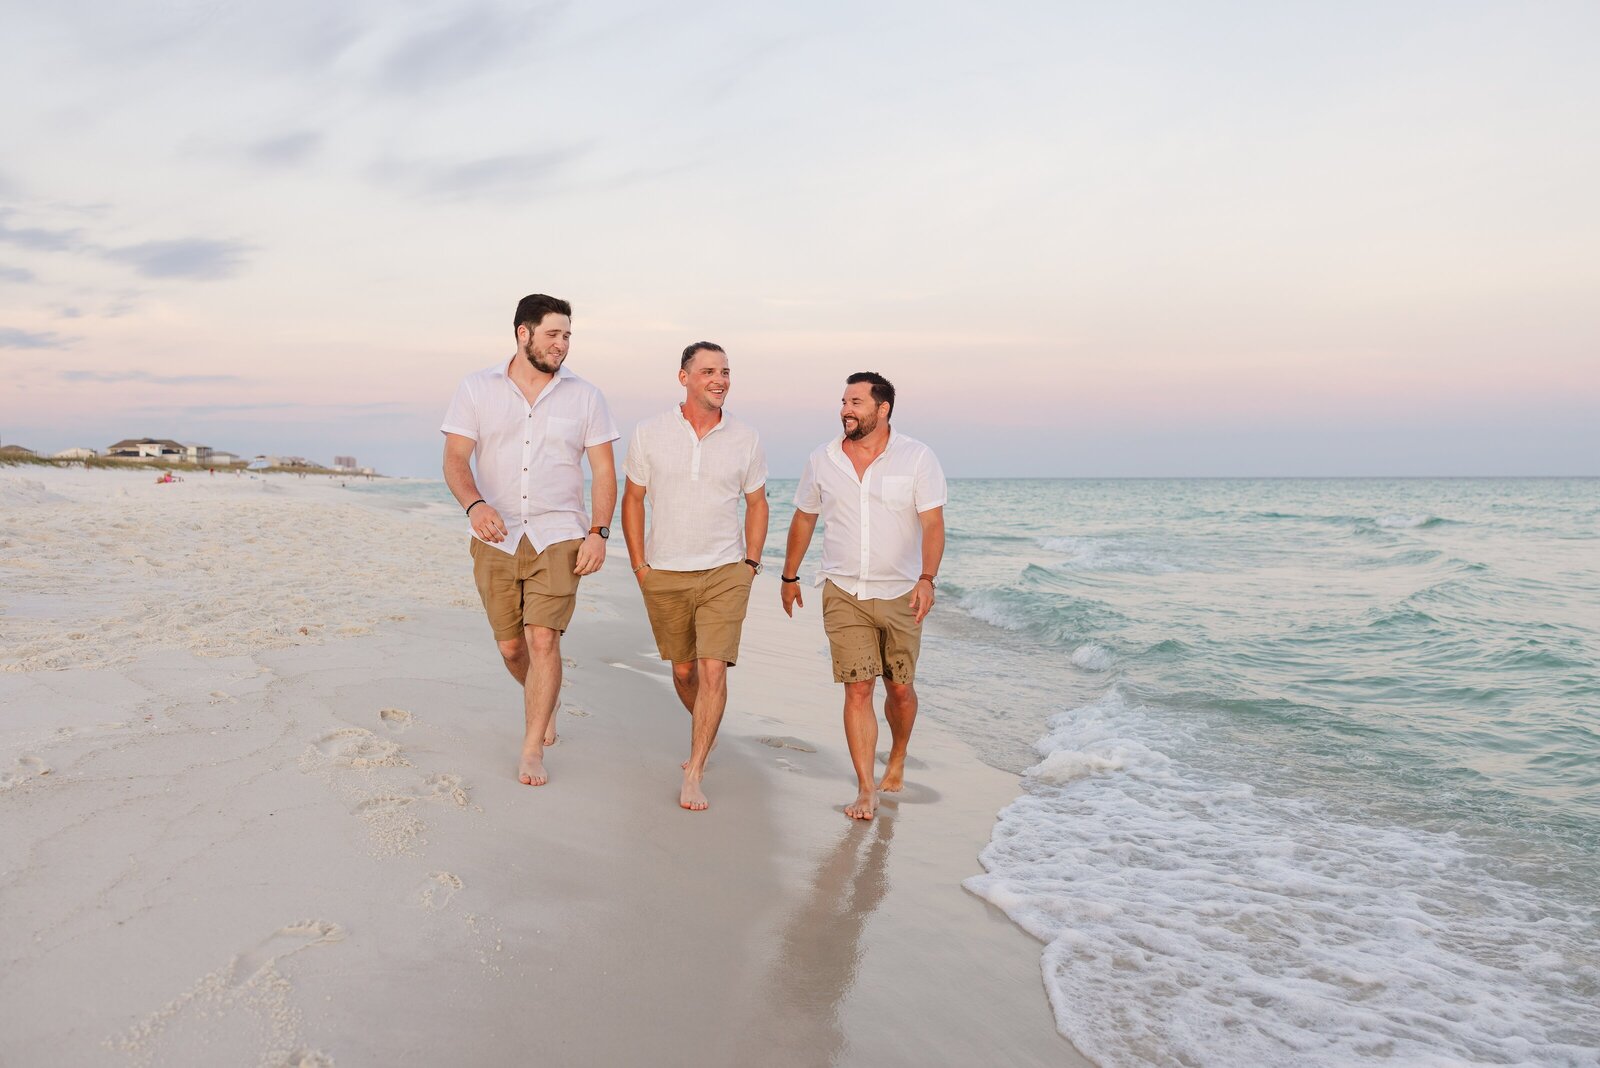 Three adult sons walking down beach at sunset during beach trip photos by Jennifer Beal Photography